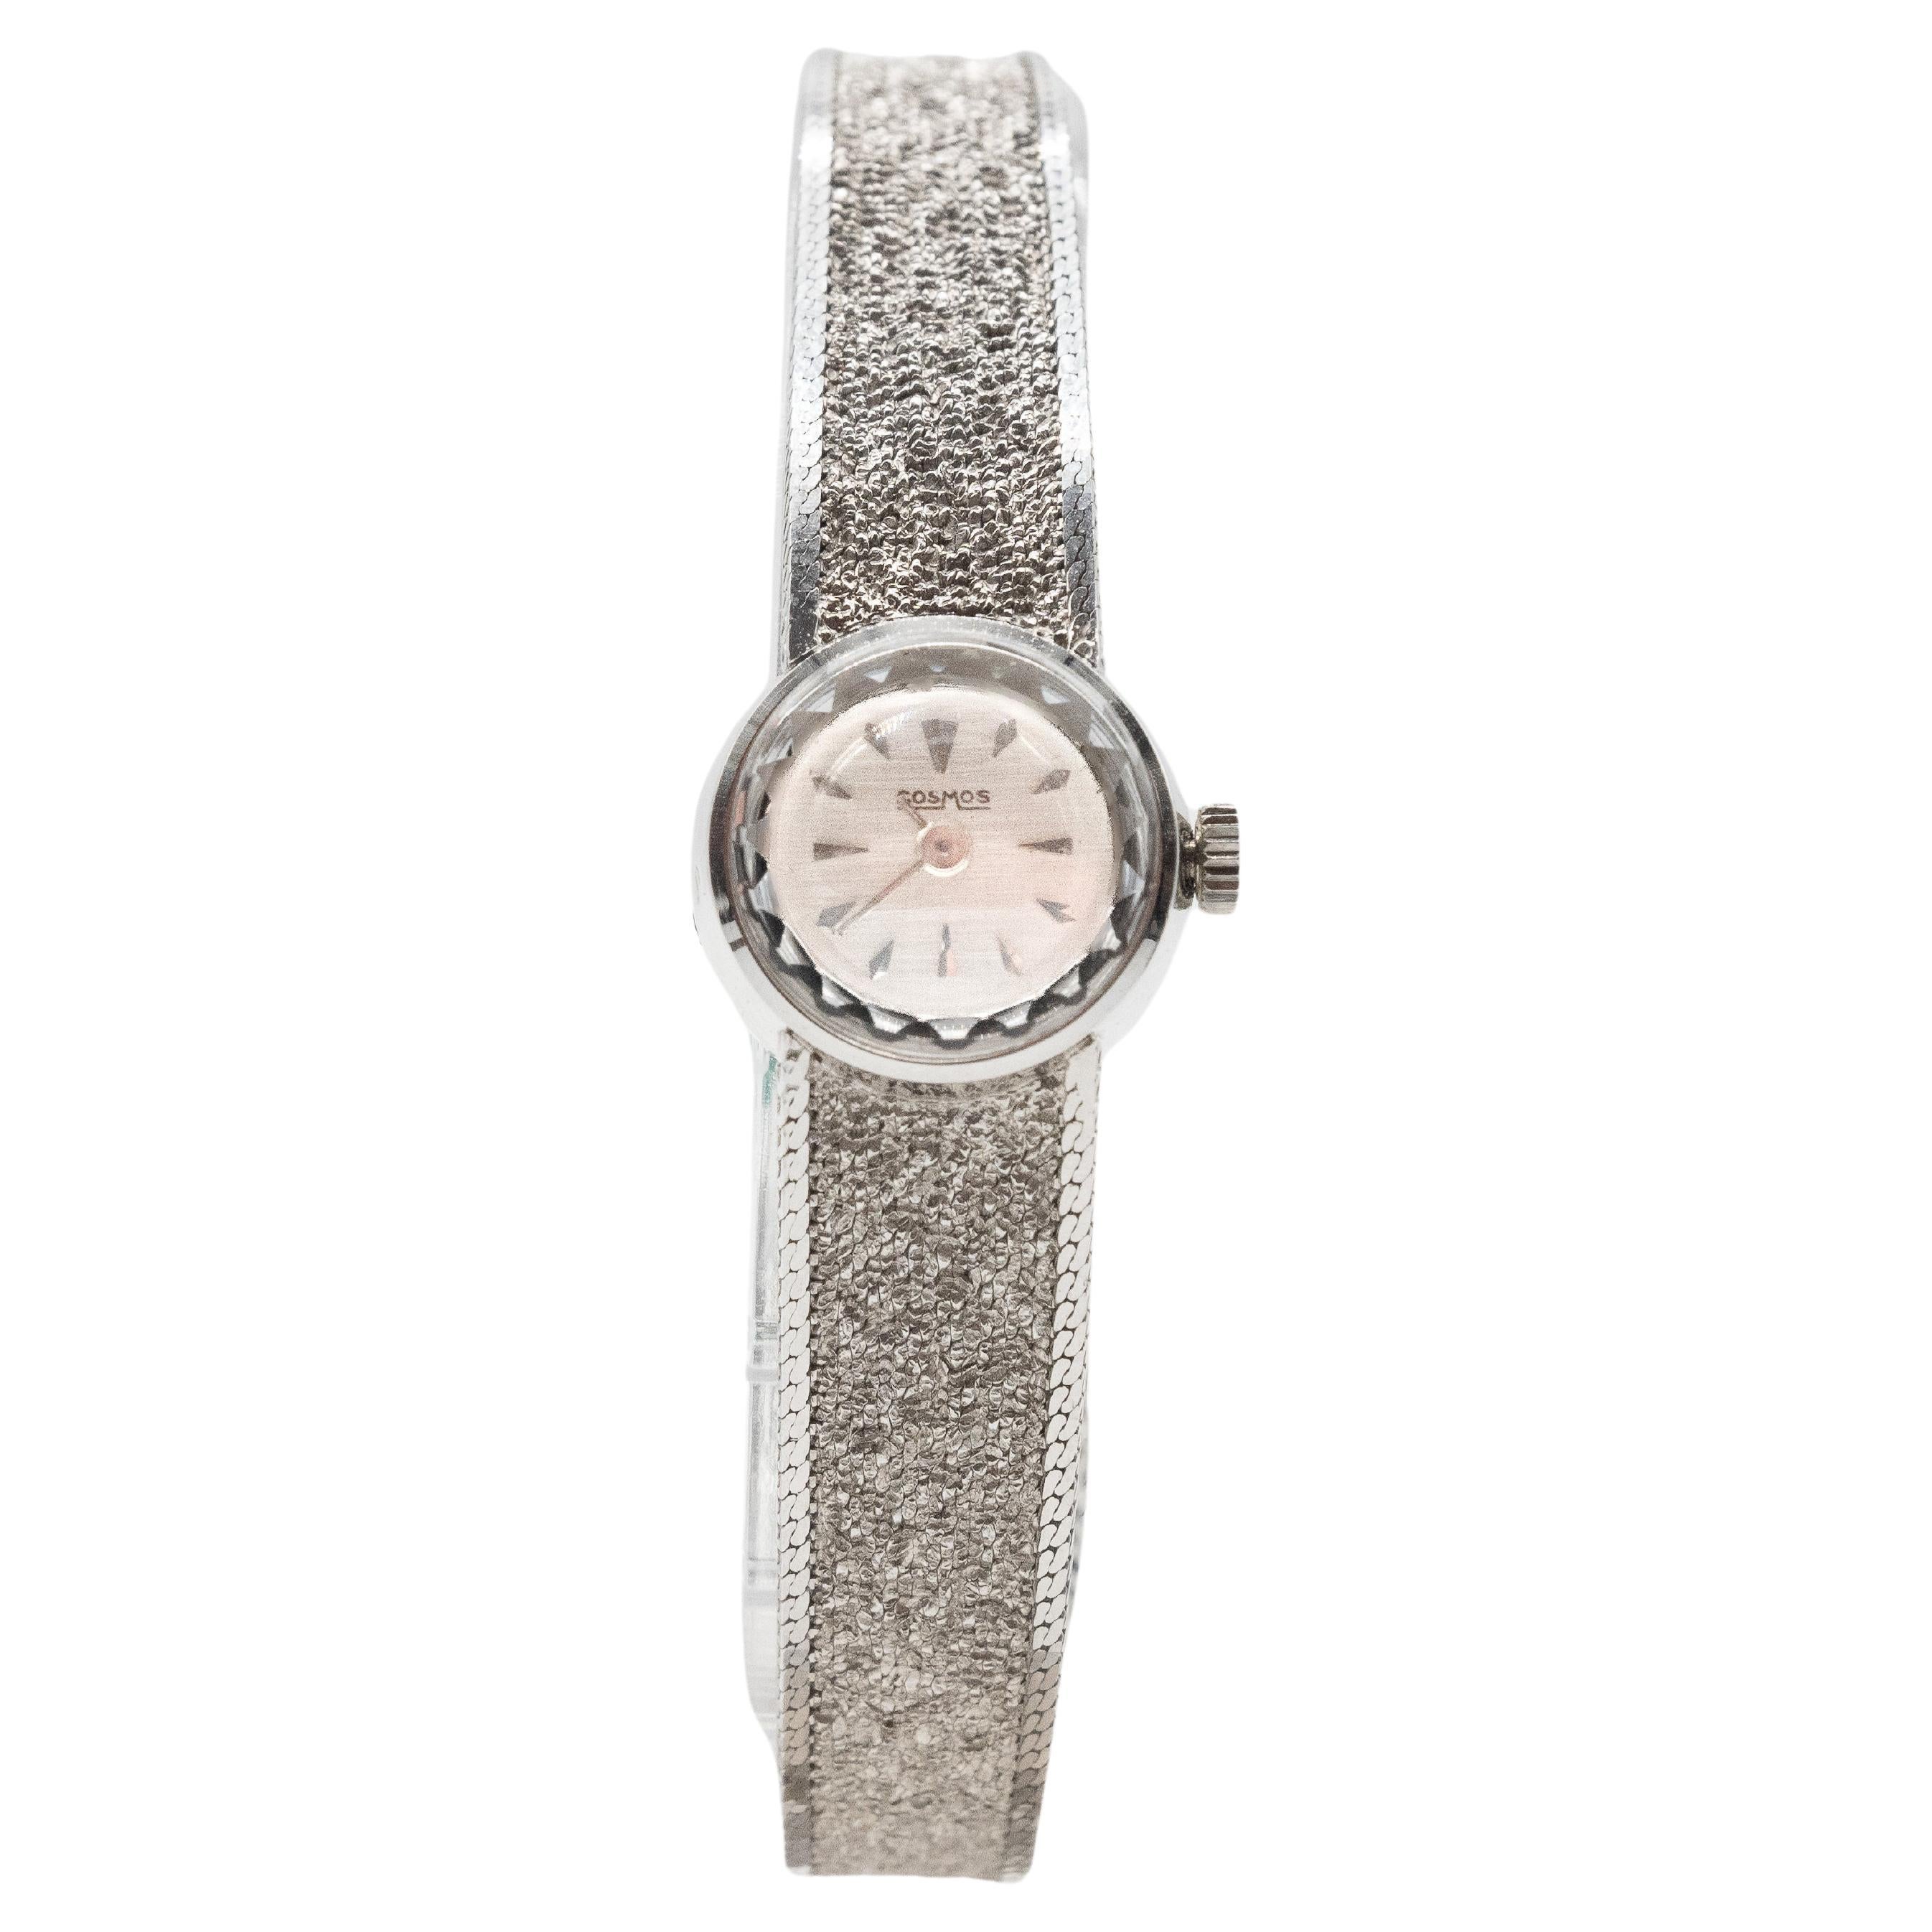 Cosmos Watch, 18 Carats White Gold